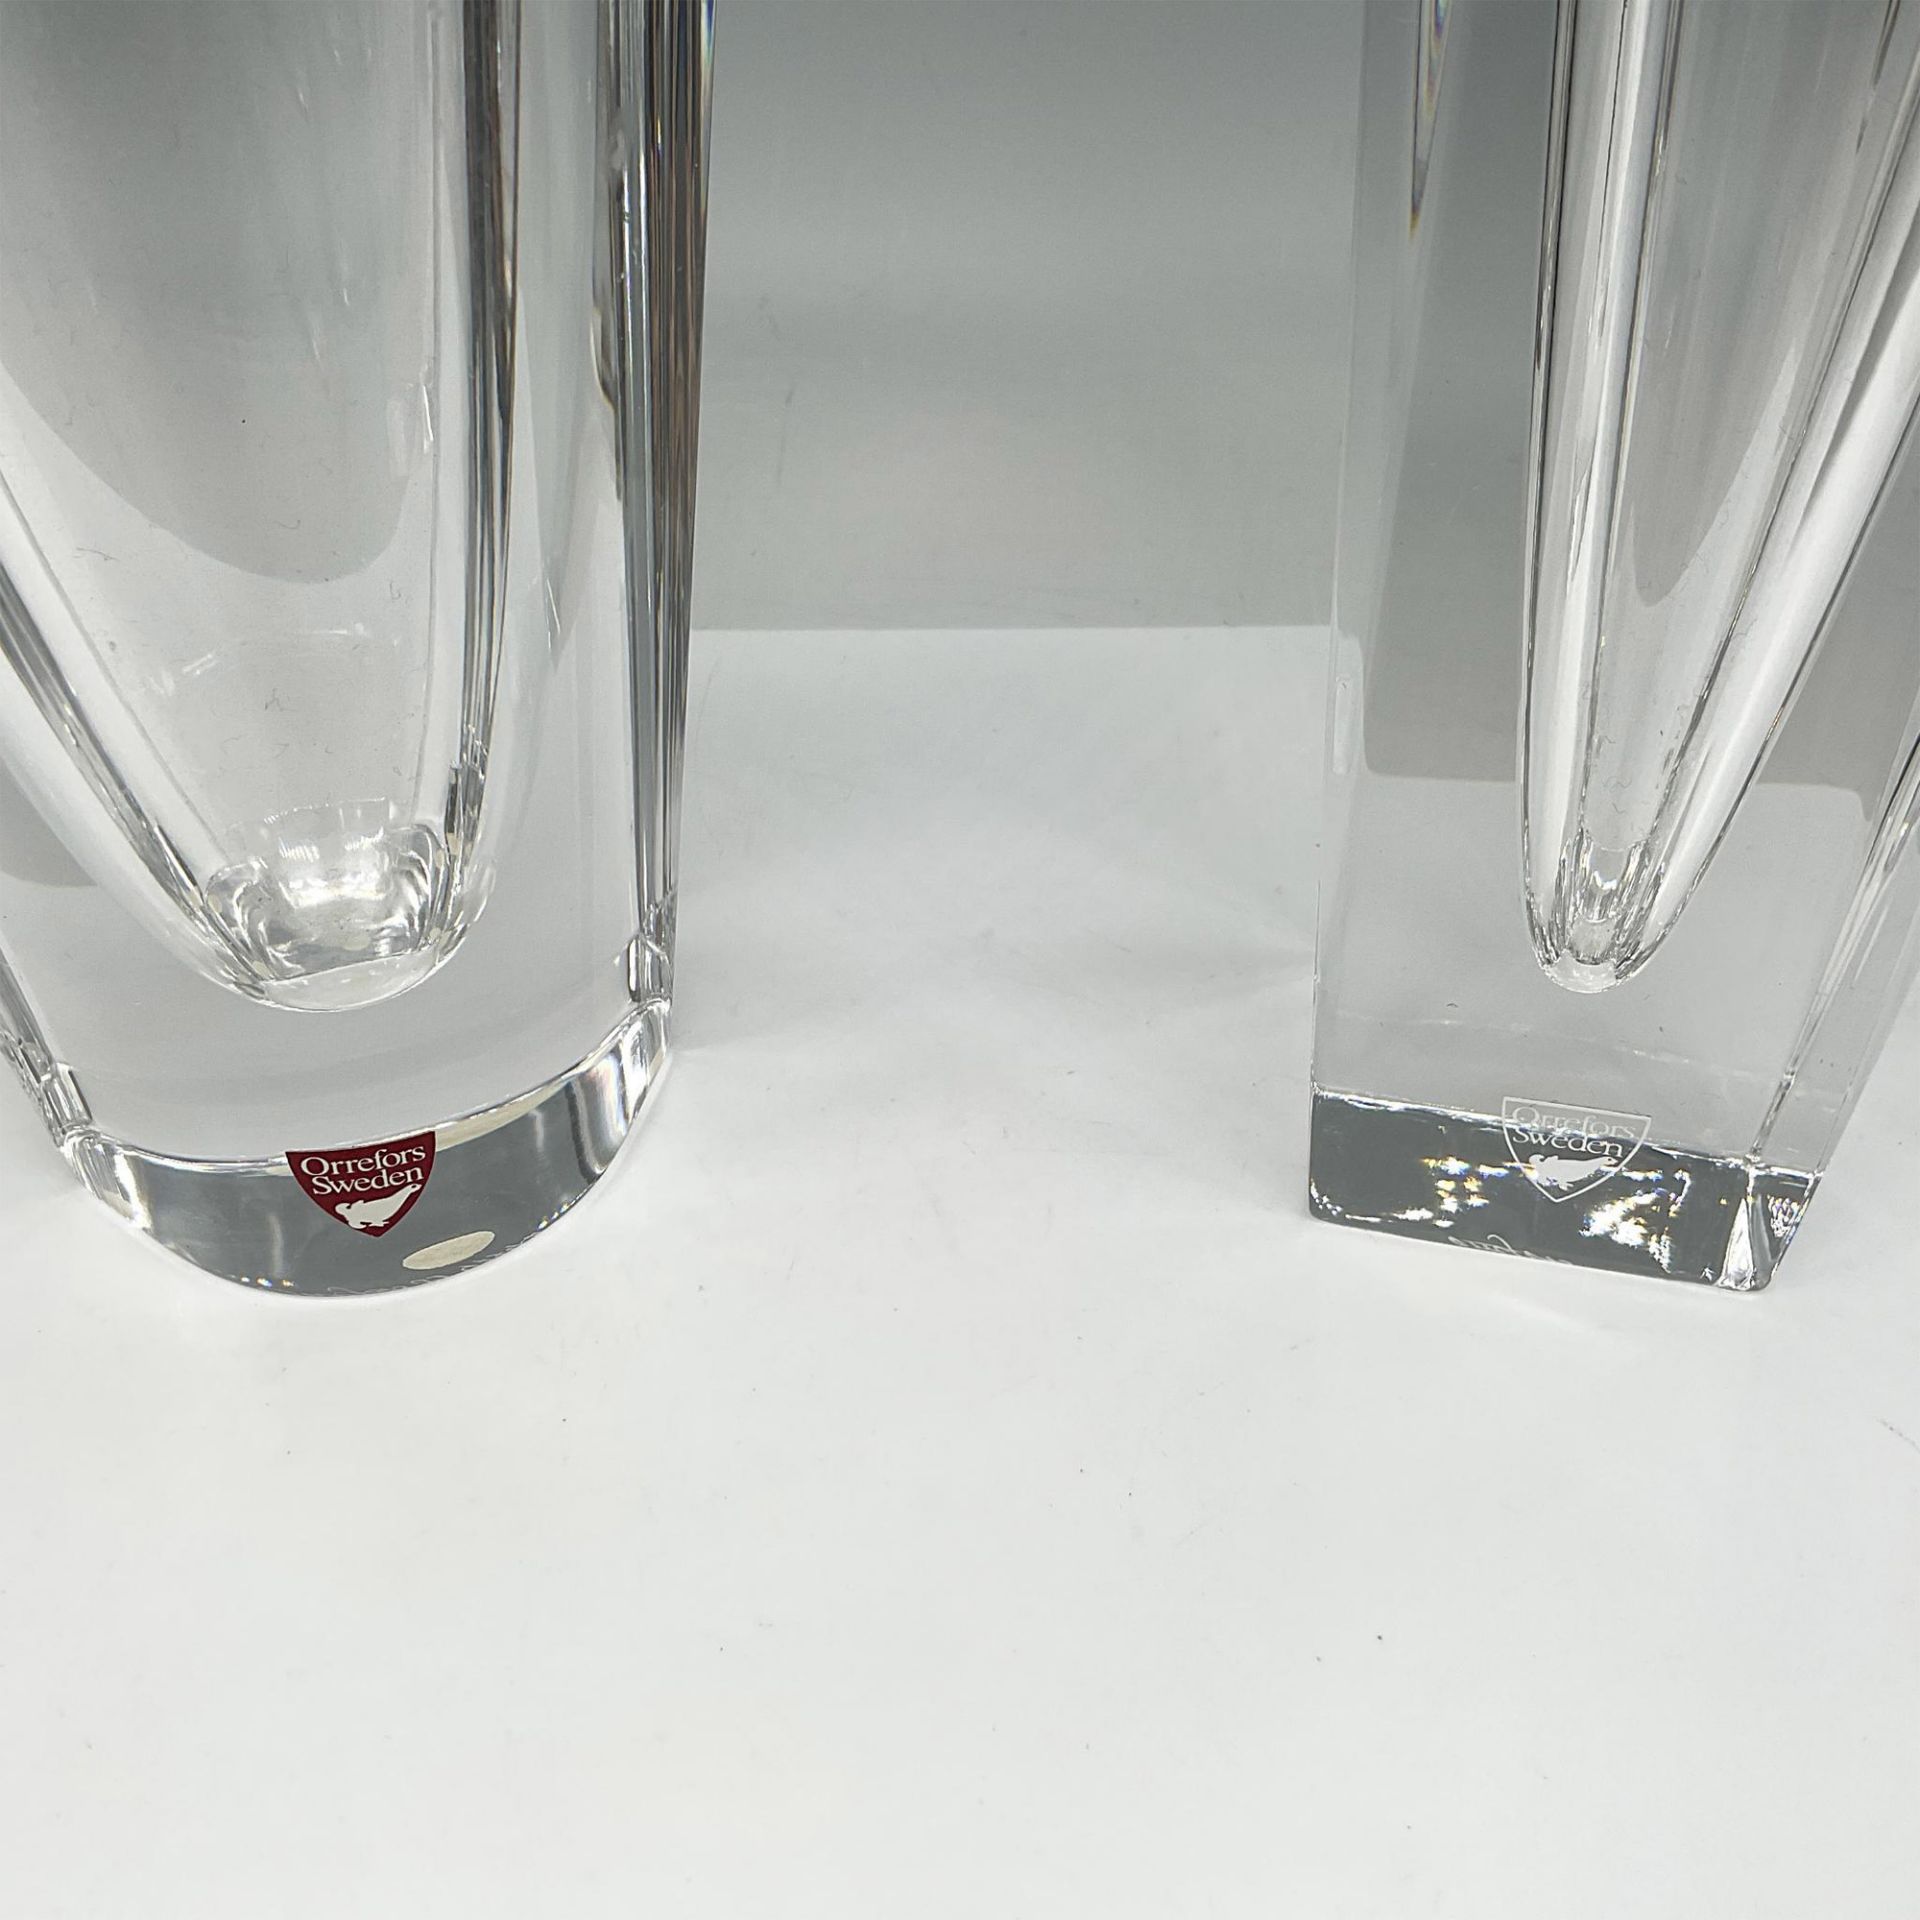 2pc Orrefors Crystal Vases - Image 3 of 4